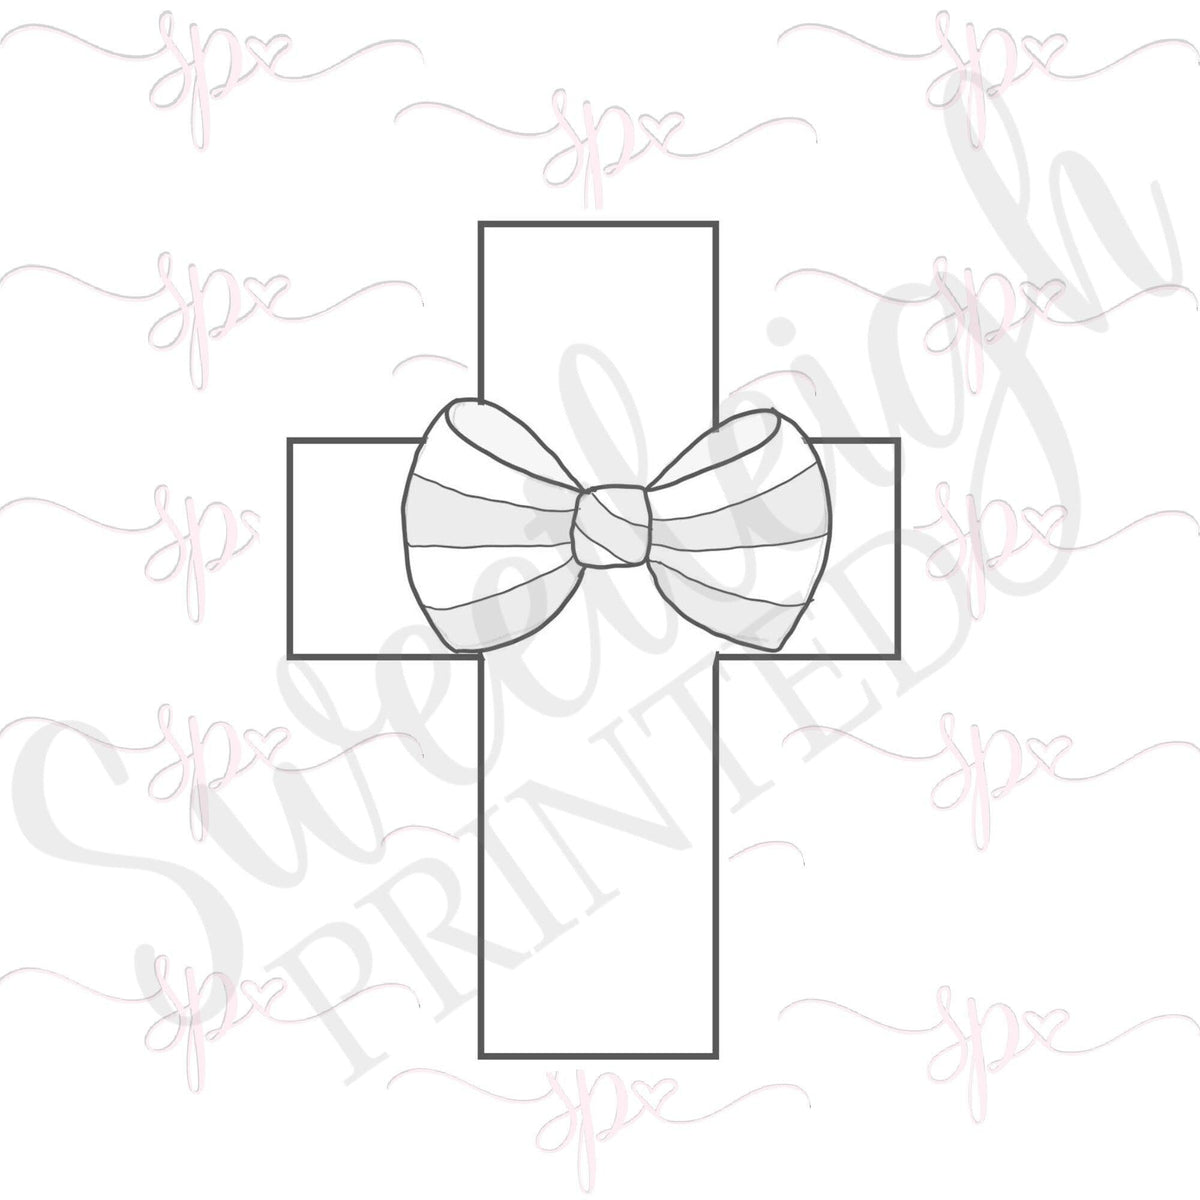 Bow Tie Cross Cookie Cutter - Sweetleigh 